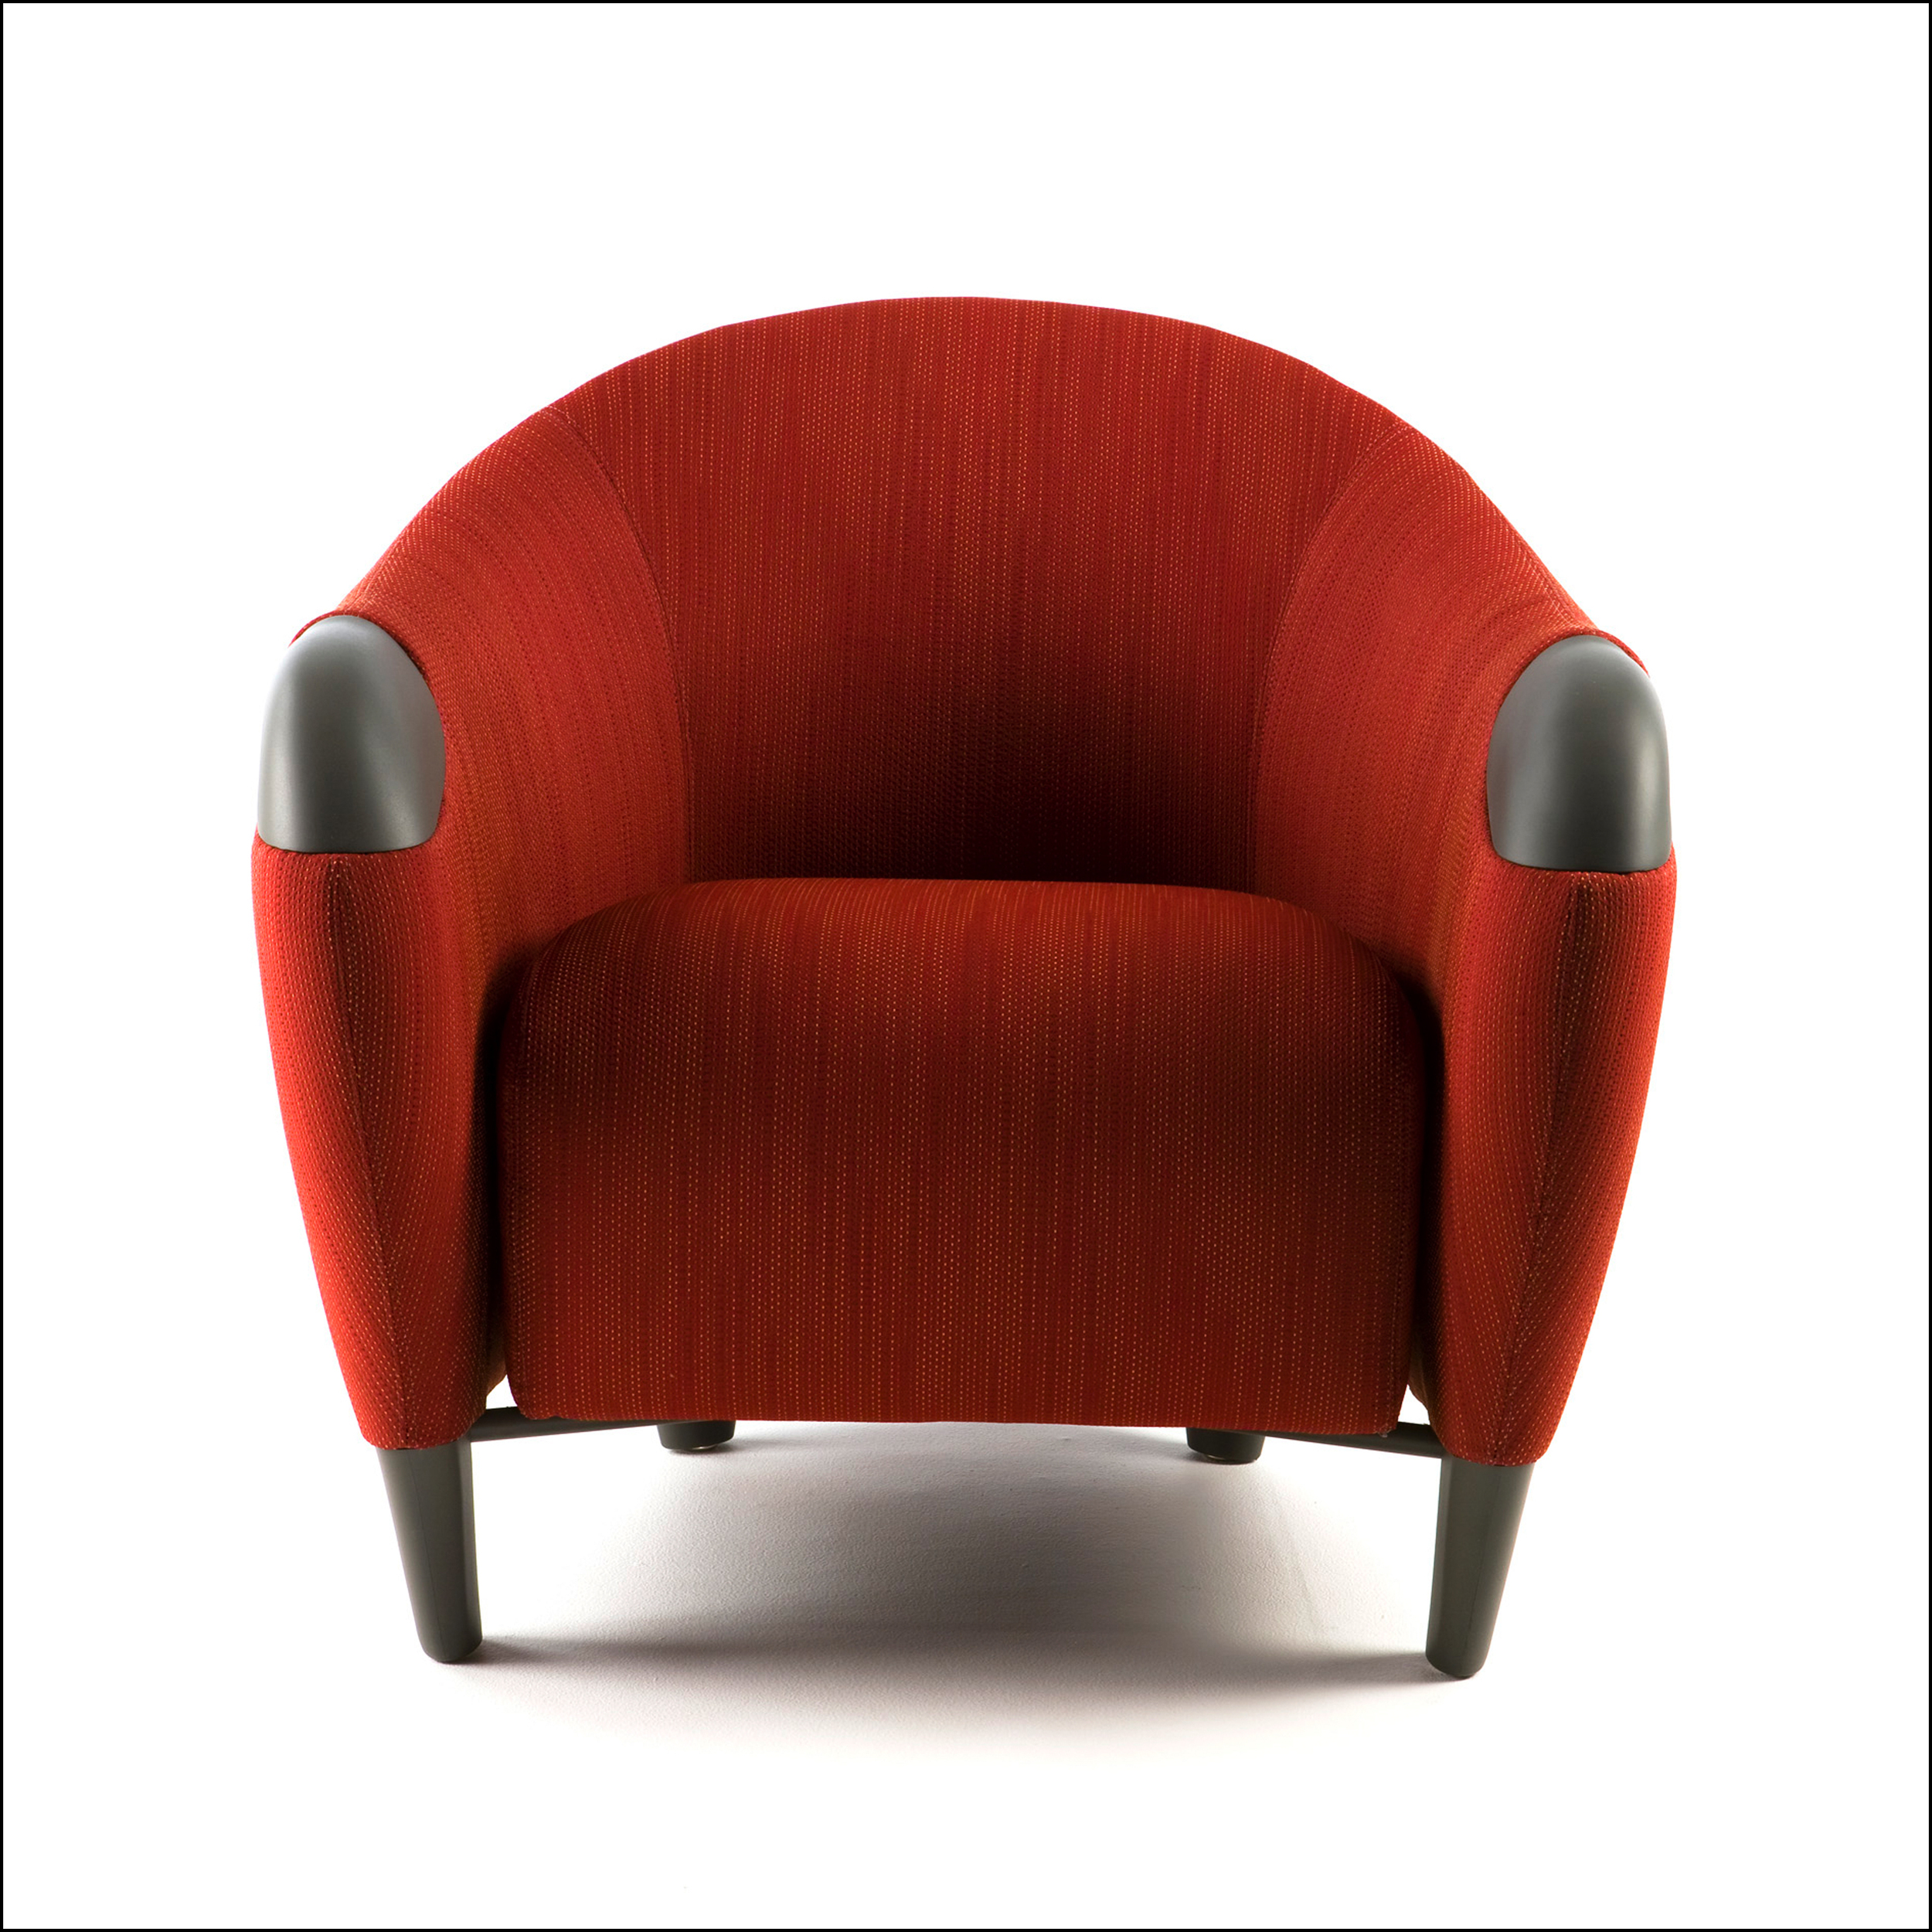 florabella health care lounge chair